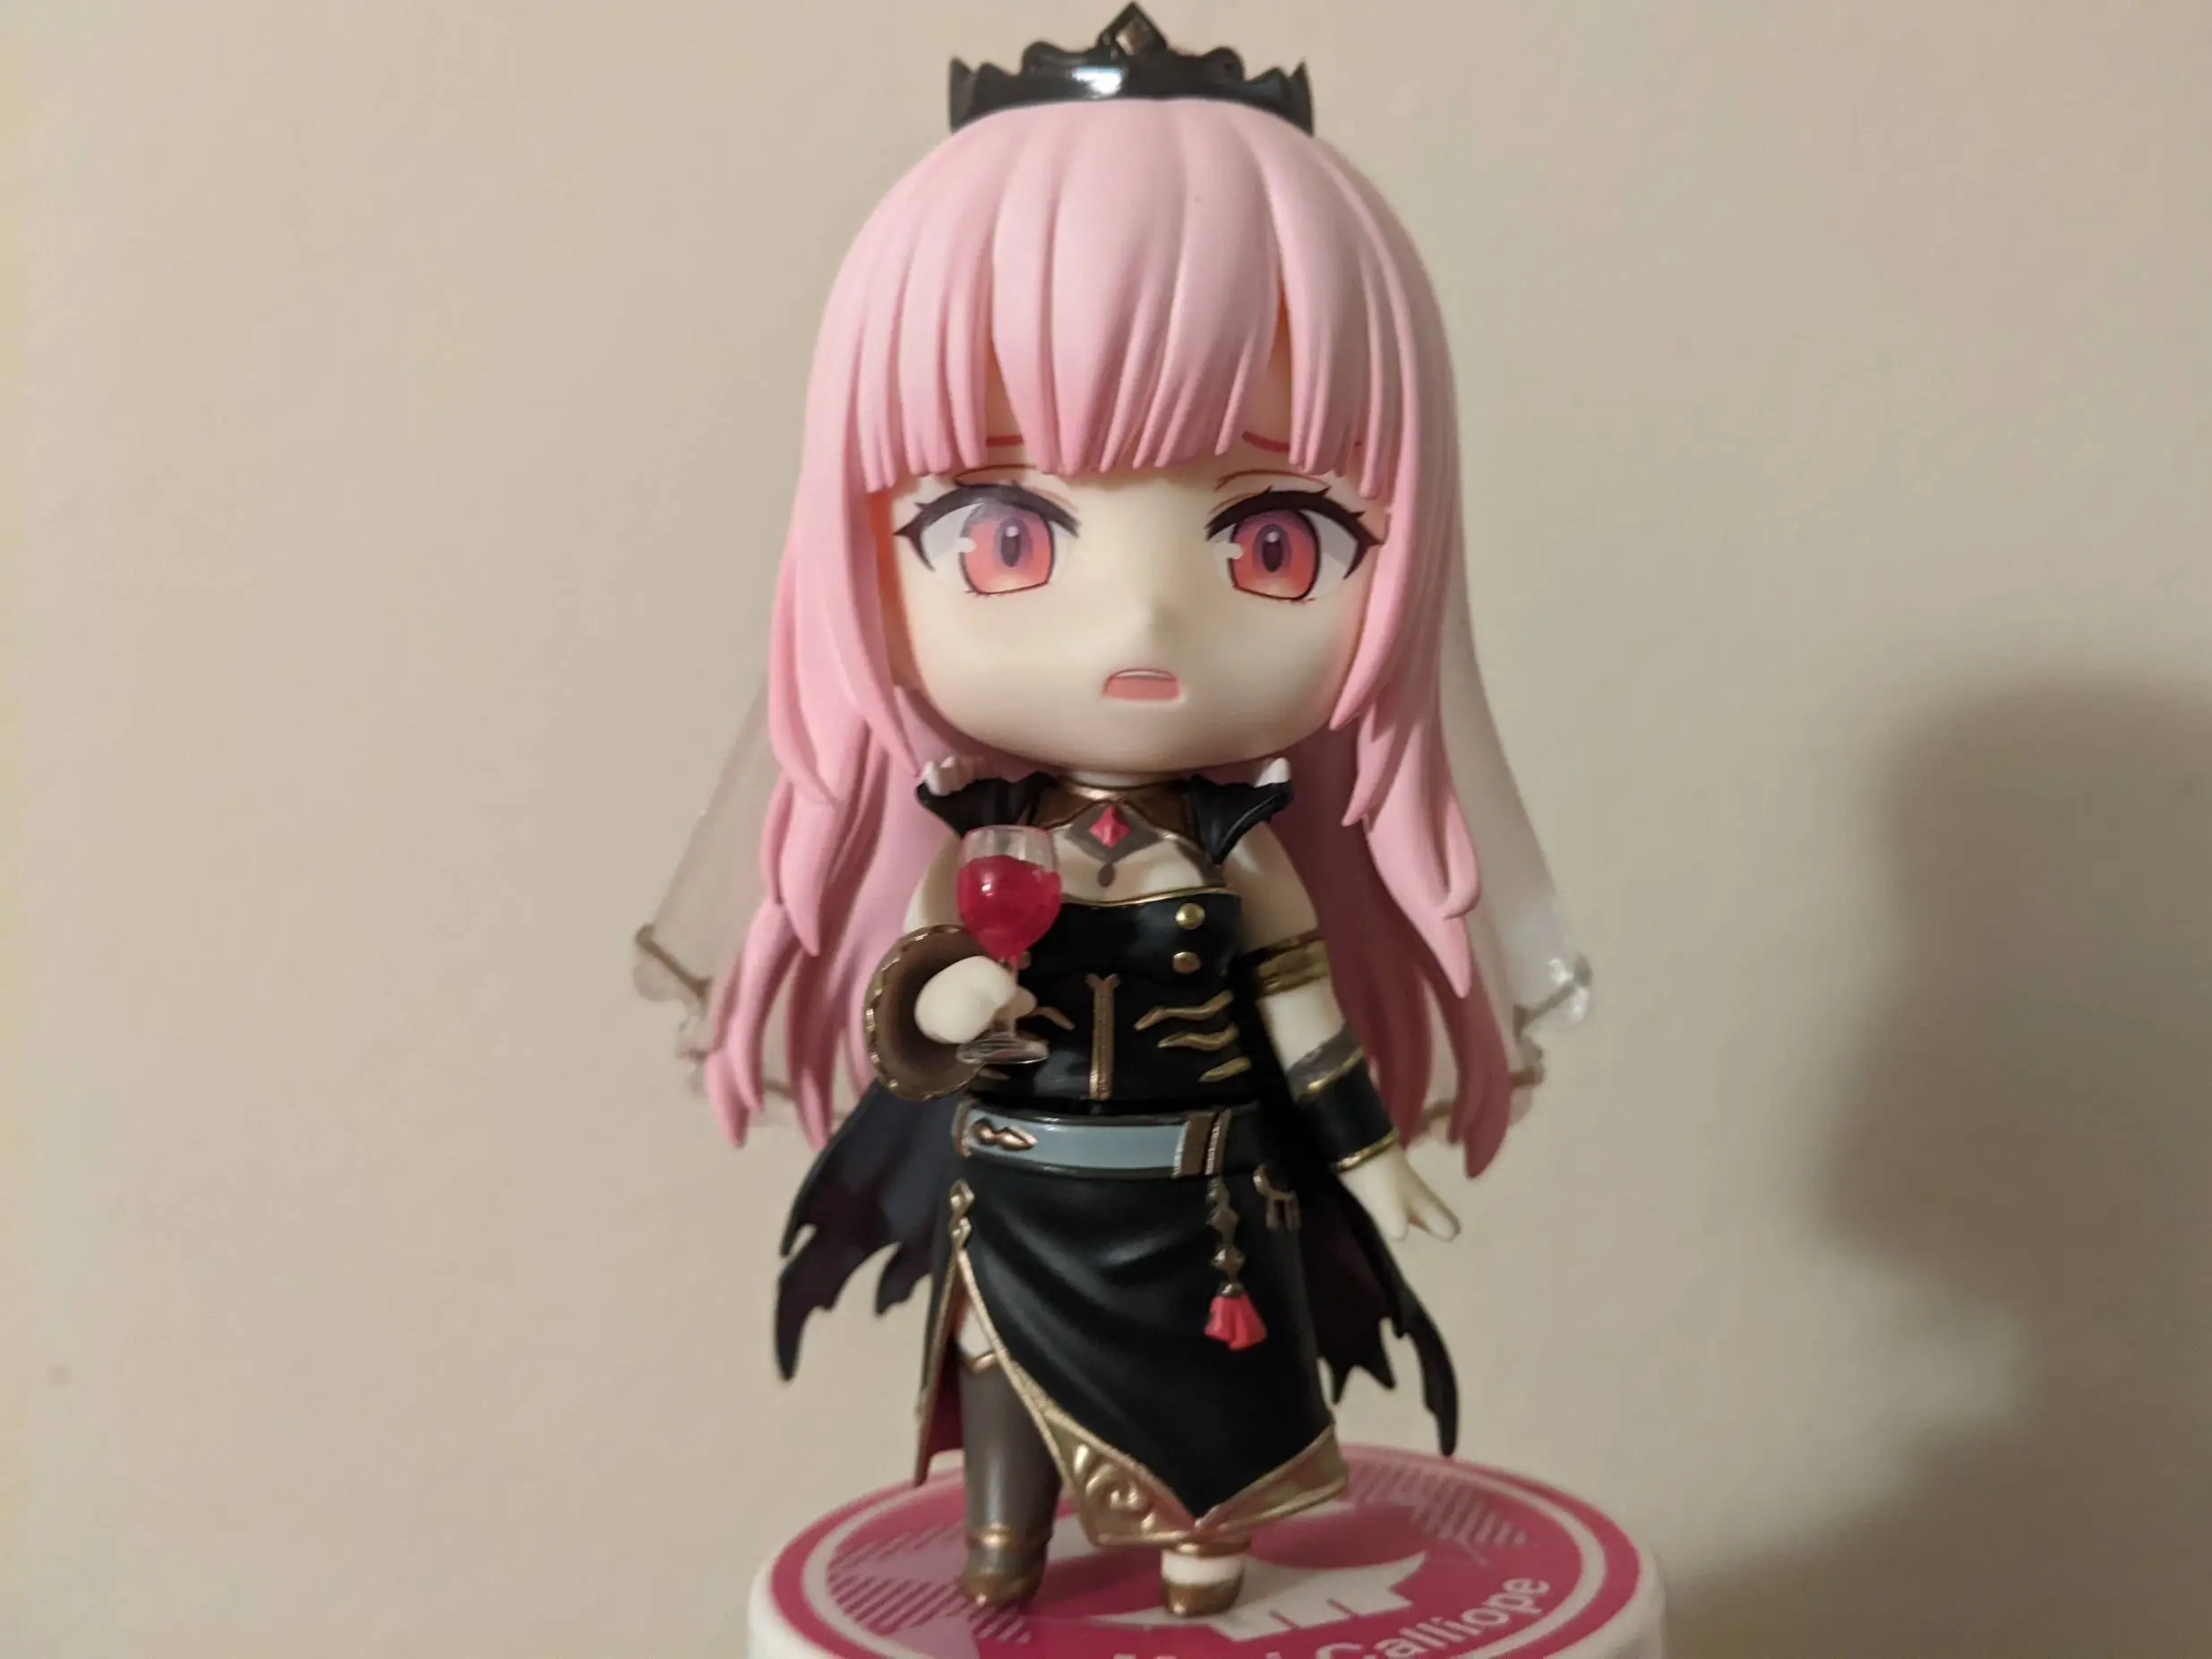 Calliope Mori Nendoroid Is an Intricate, but Fiddly Hololive Figure